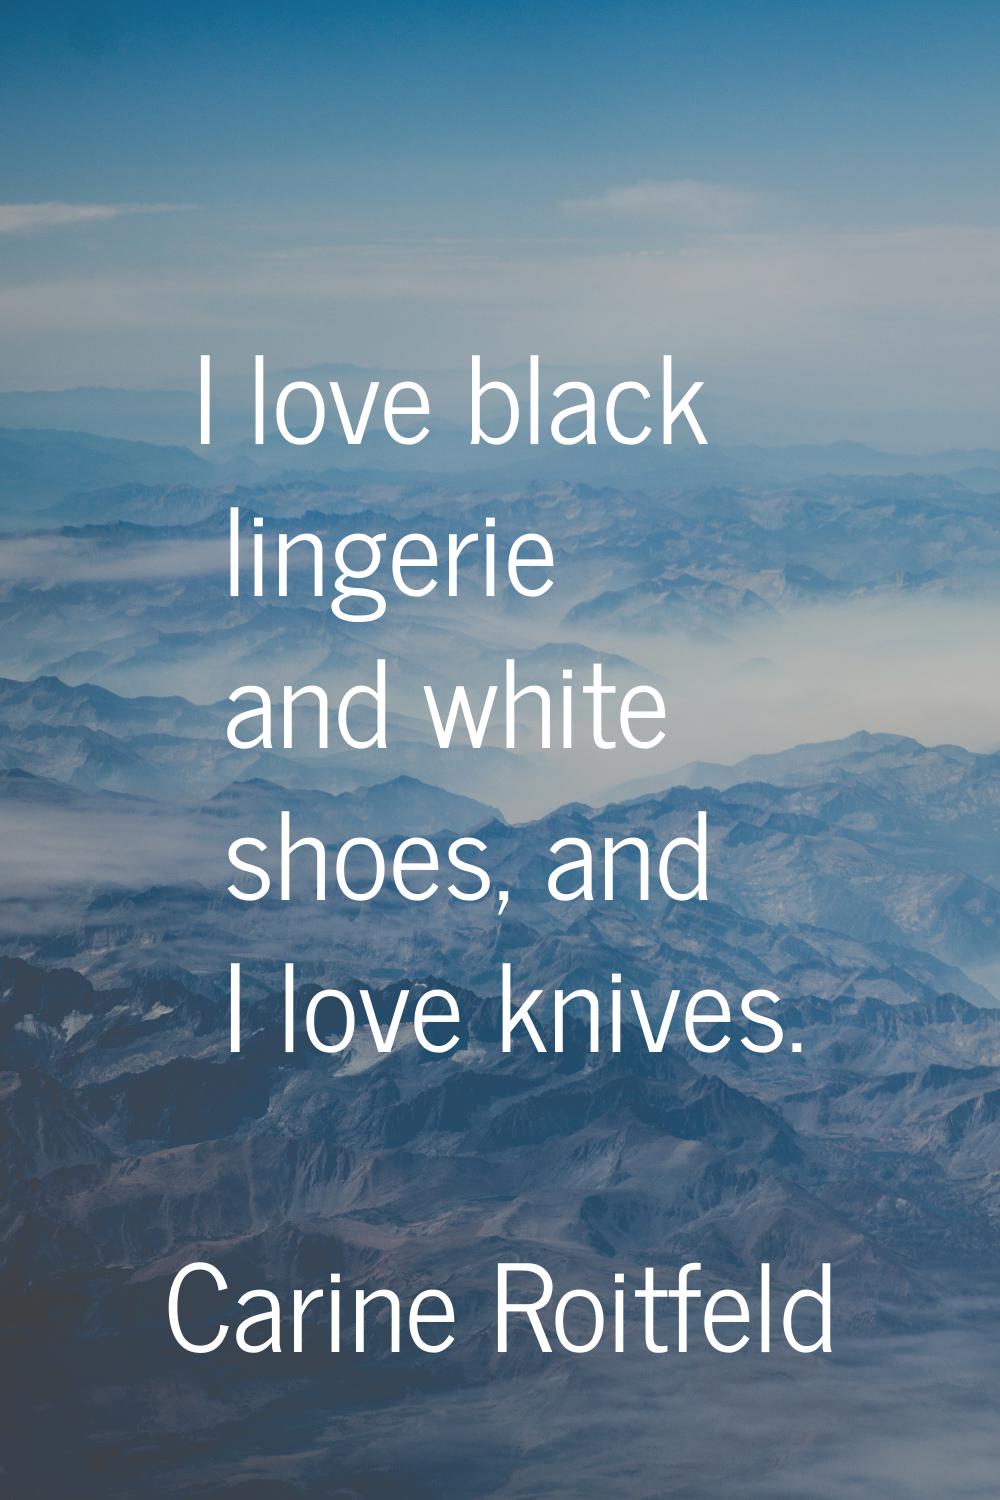 I love black lingerie and white shoes, and I love knives.